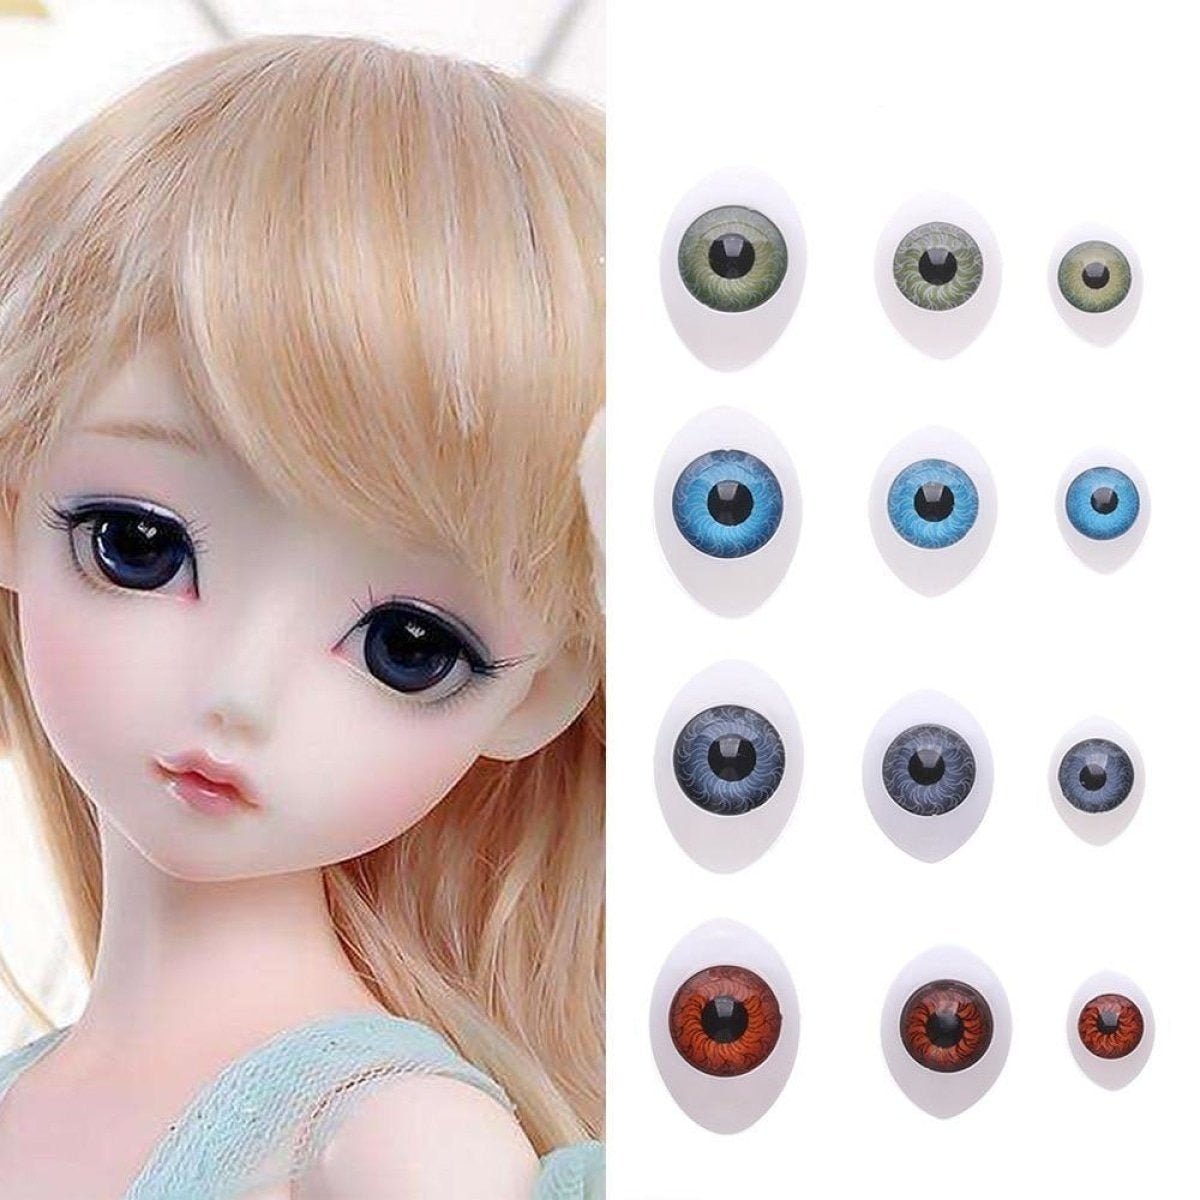 16/20pcs Oval Shaped Doll Eyes Plastic for DIY Toy Doll Animal Puppet Dinosaur Half Round - Green - 10x13mm - Asia Sell